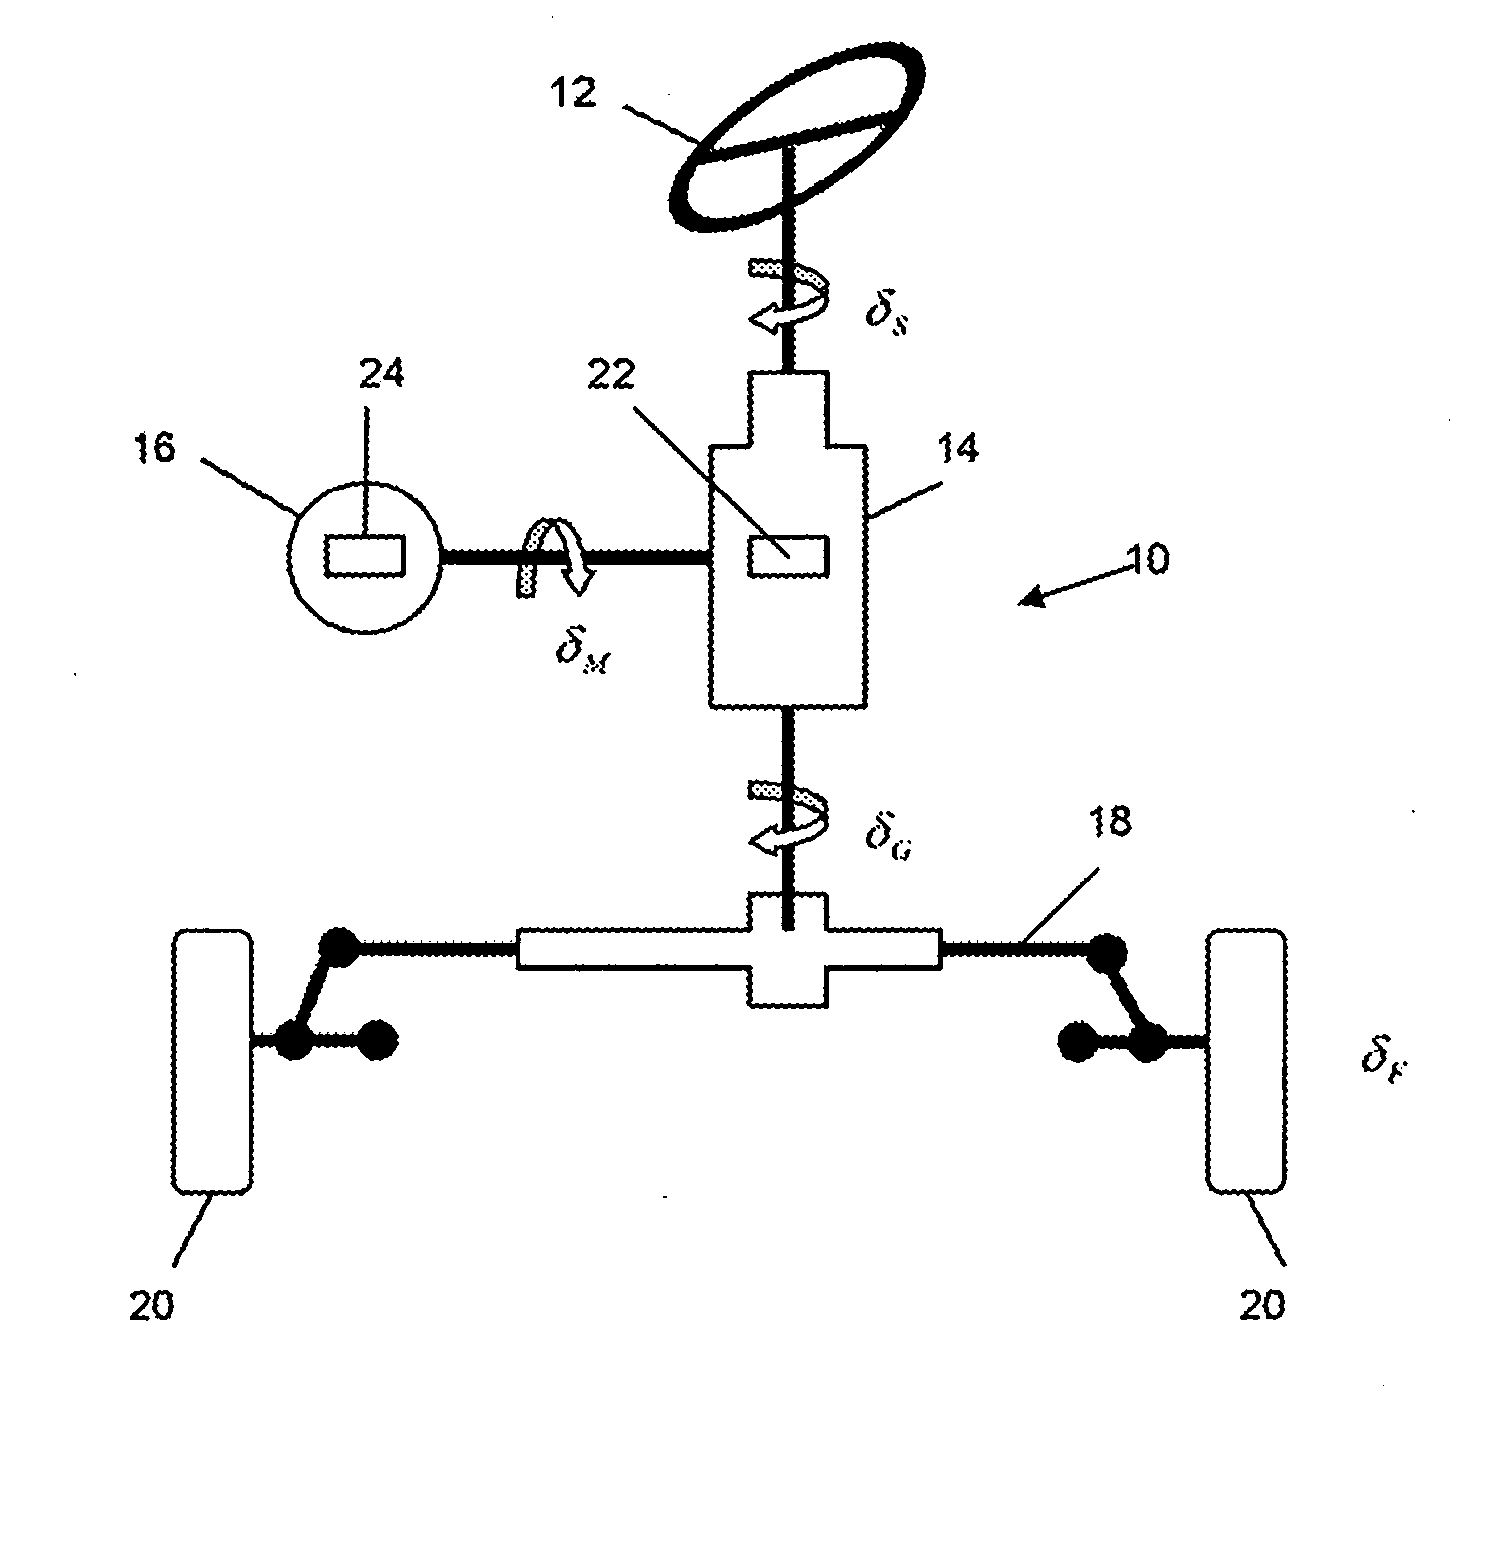 Method for activating a superimposed steering system